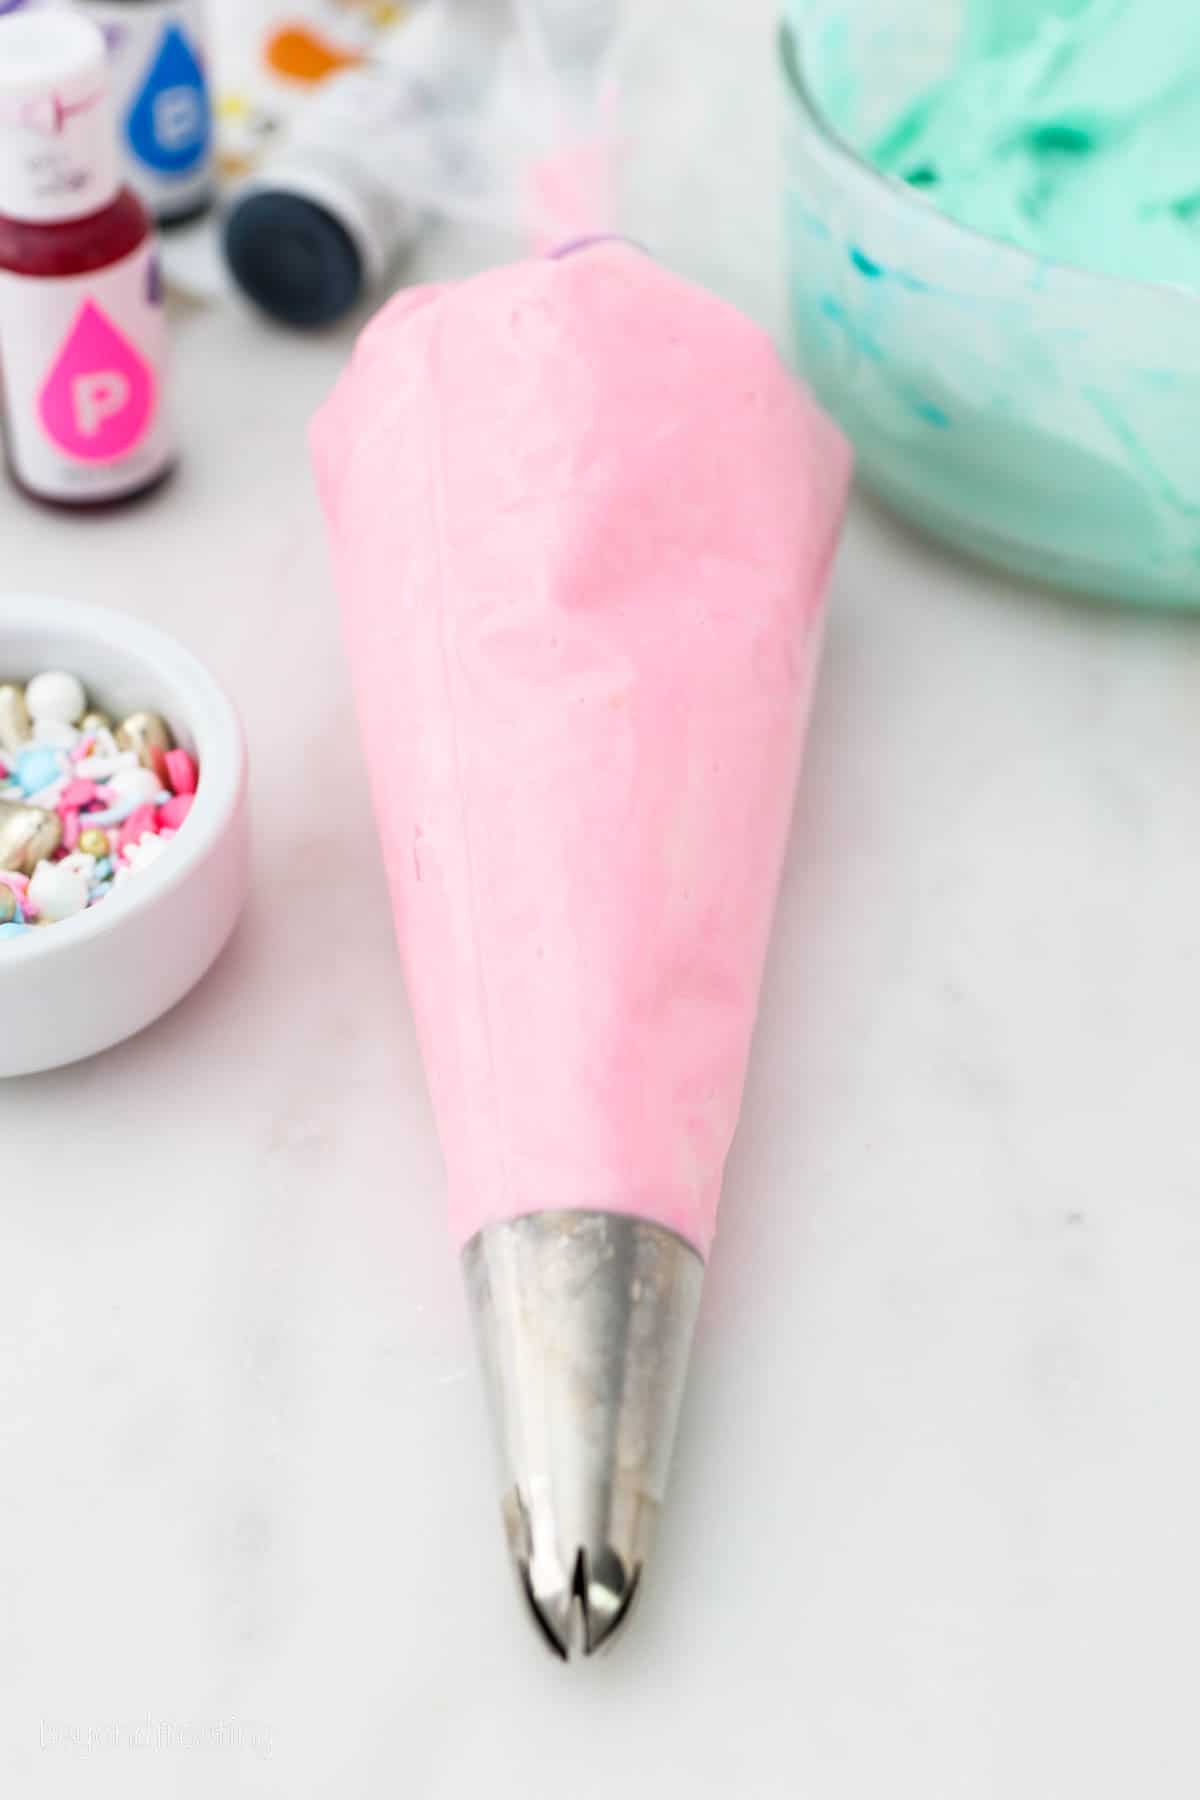 A piping bag with a tip filled with pink buttercream frosting.